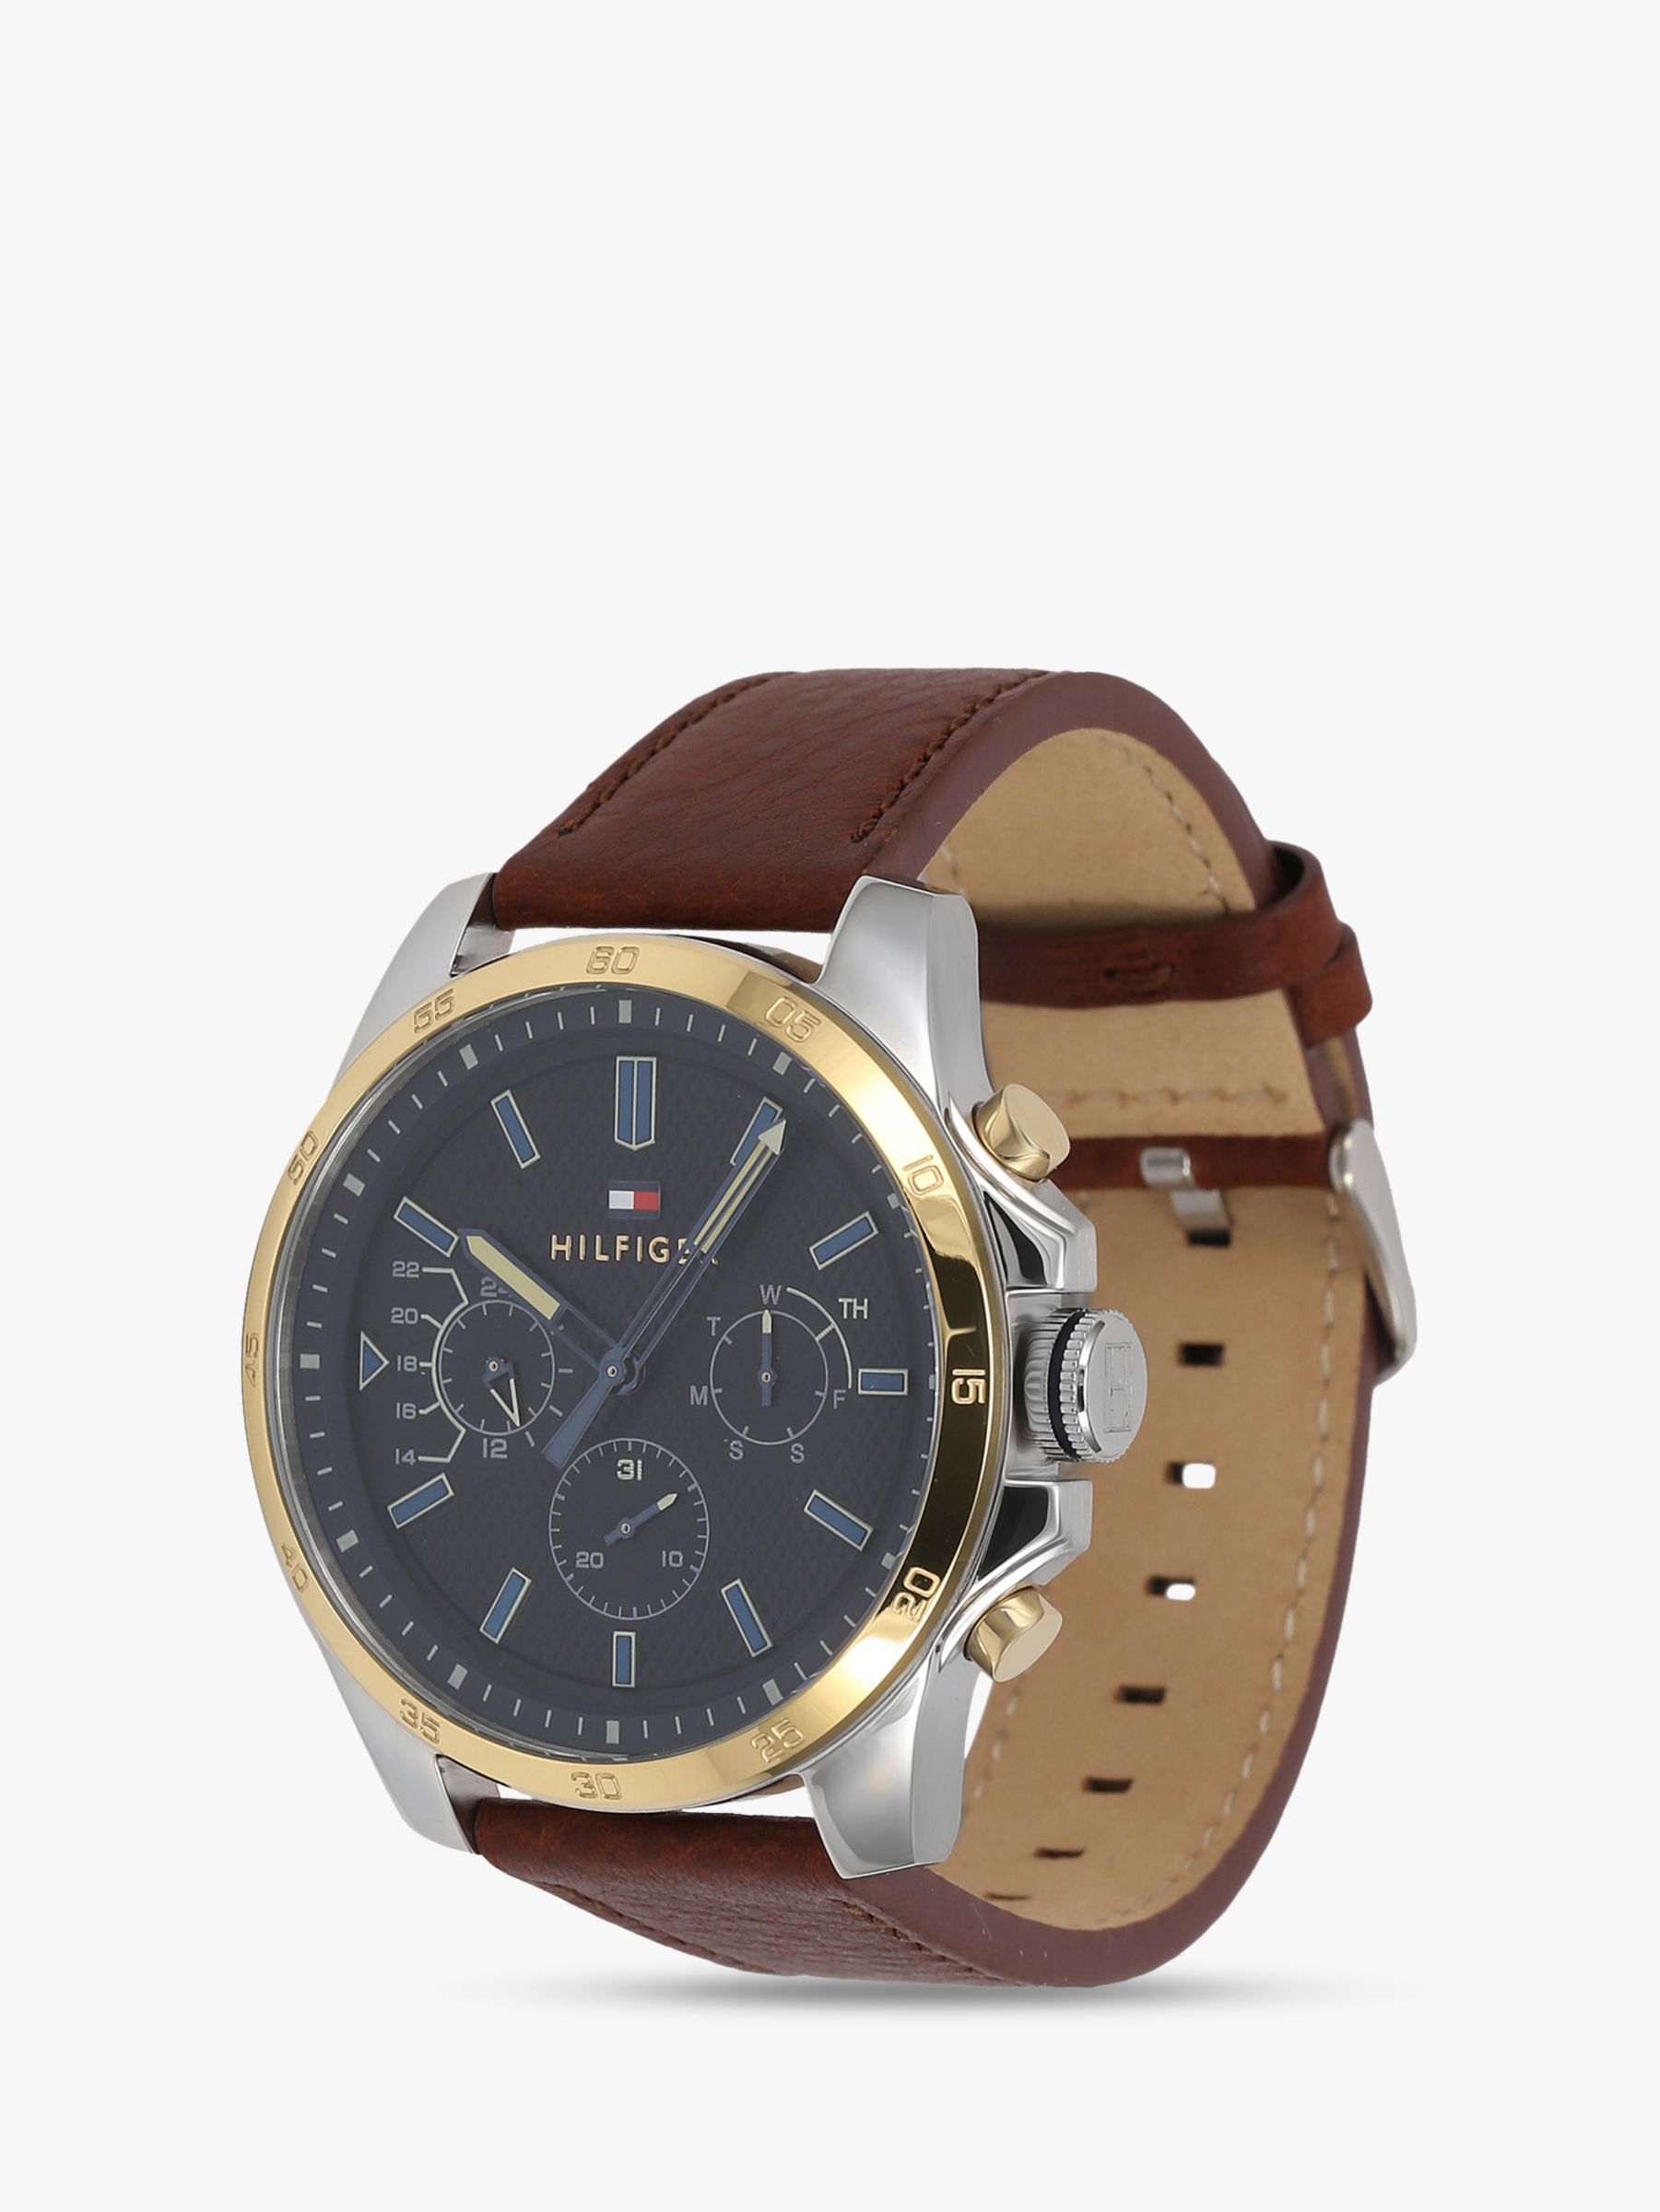 Buy Tommy Hilfiger 1791561 Men's Chronograph Leather Strap Watch, Brown/Blue Online at johnlewis.com